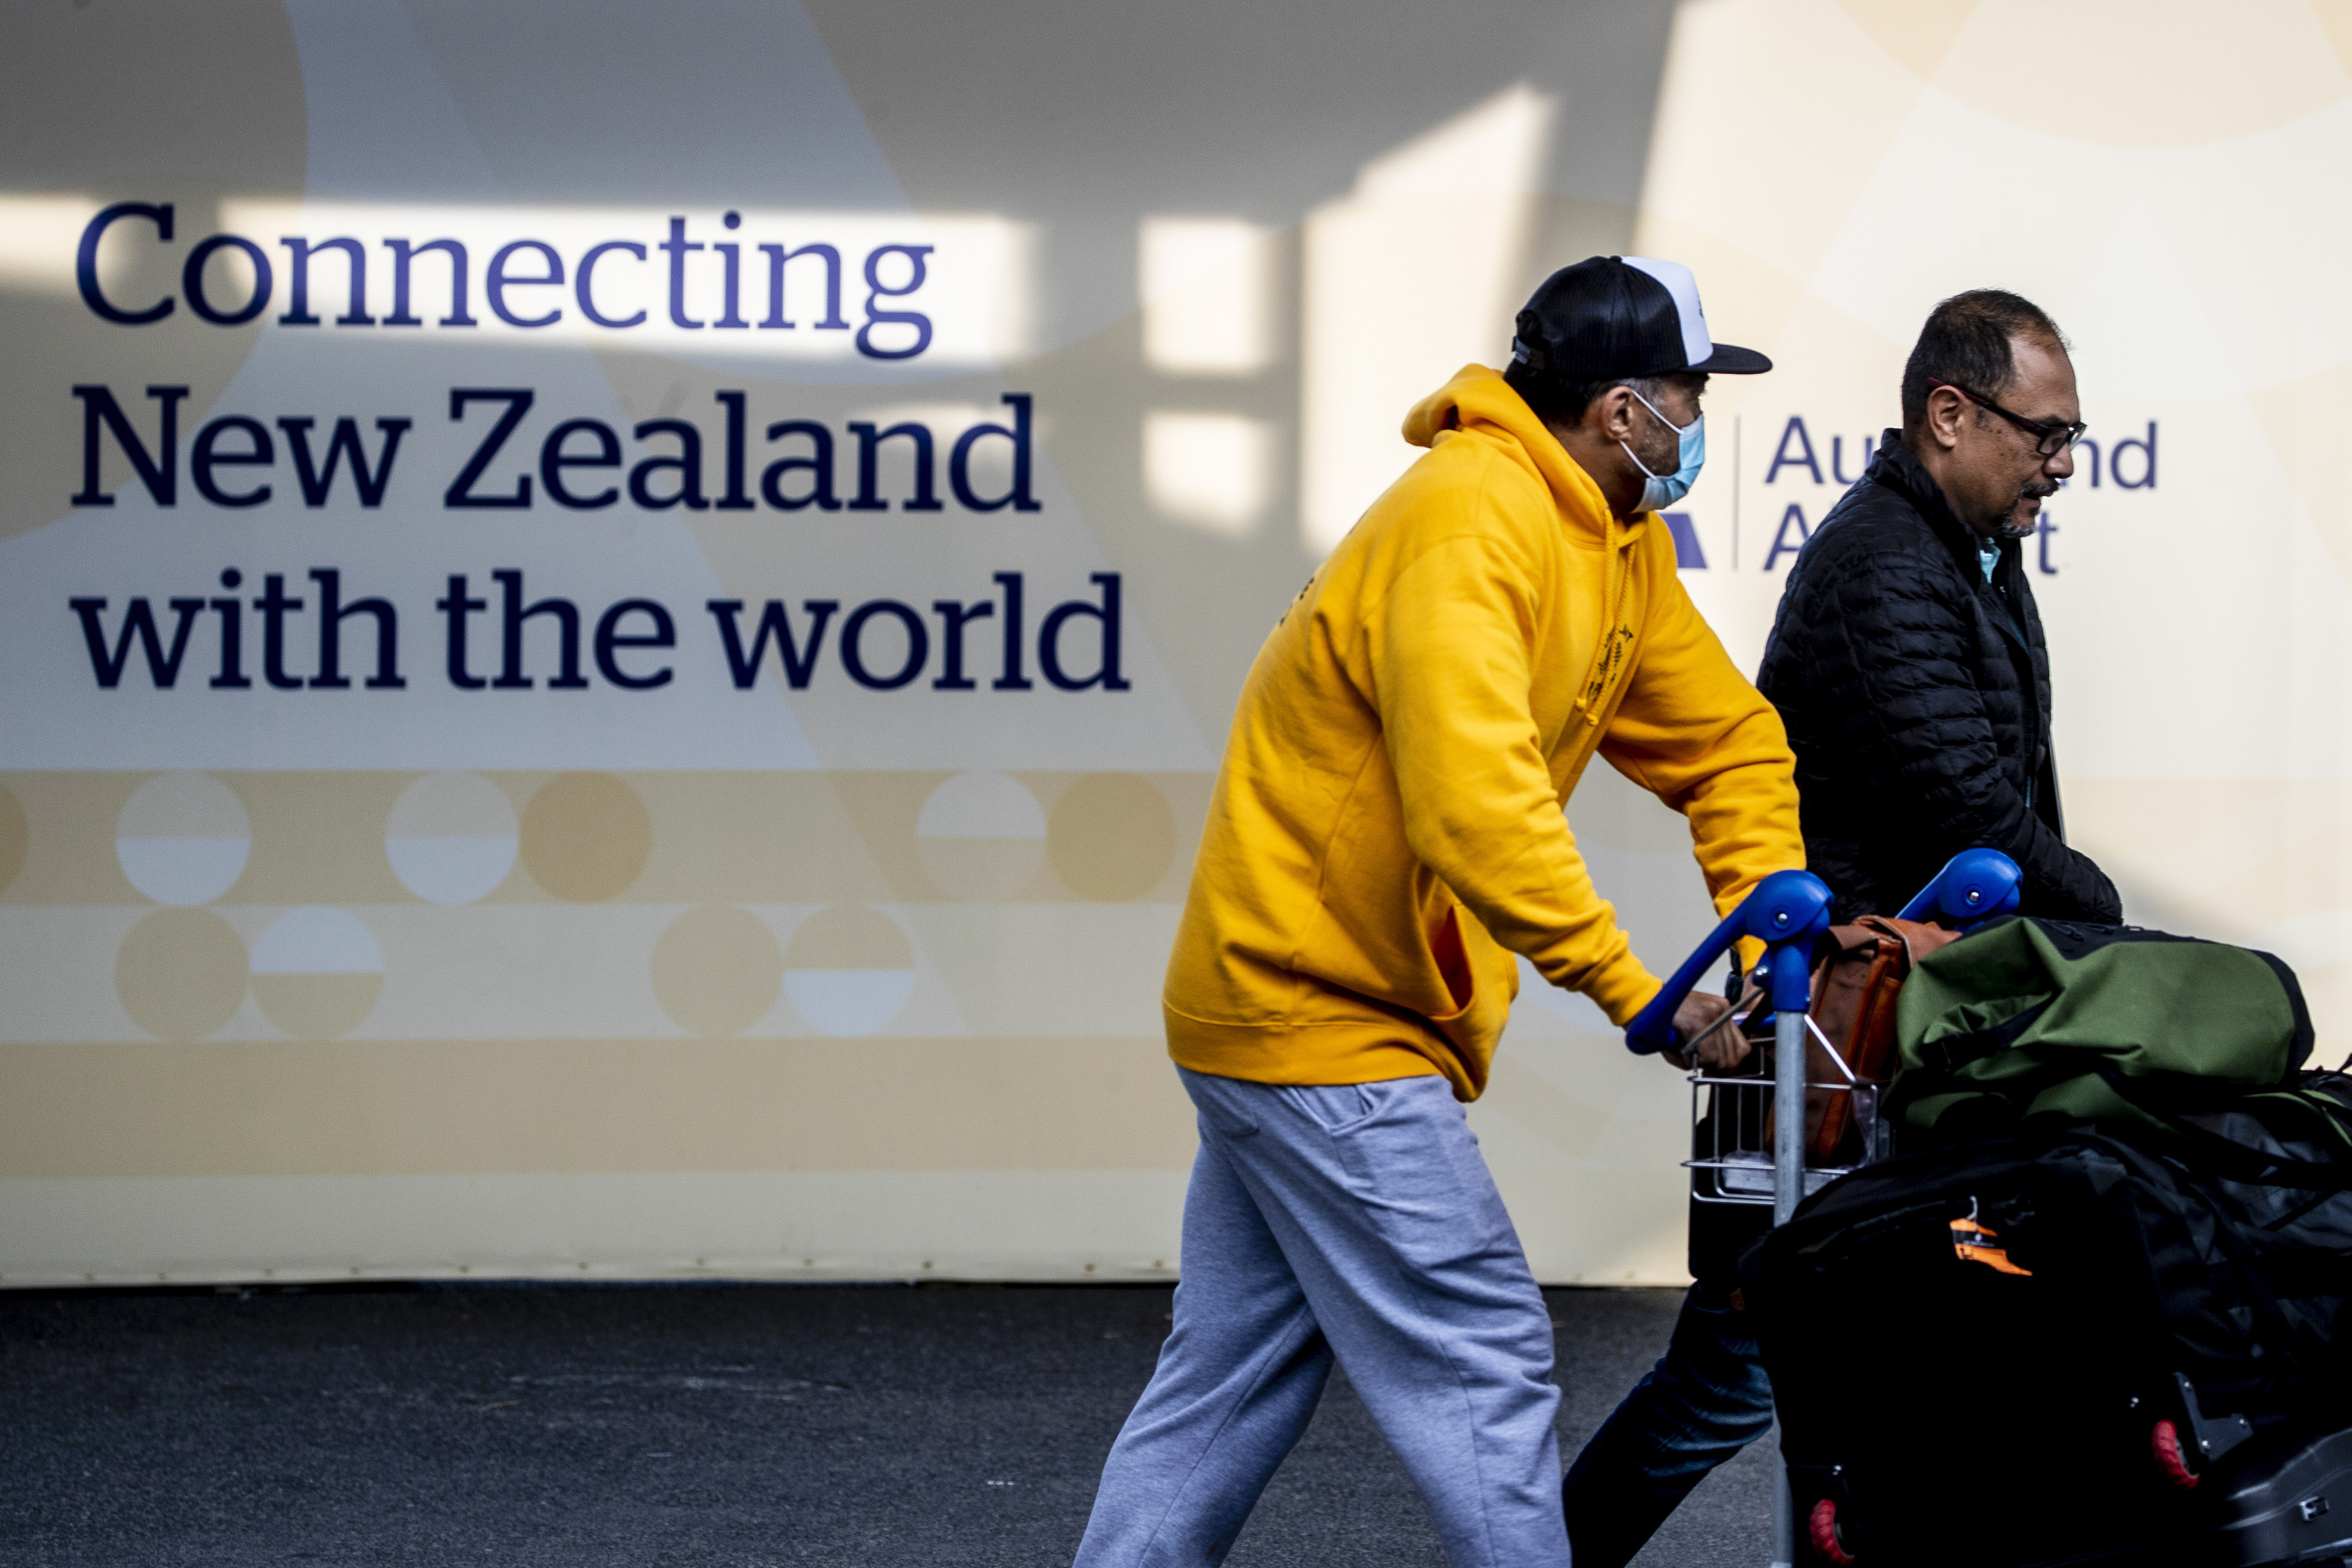 Covid-19 test requirements for travellers heading for New Zealand look set to be scrapped from early next week. Photo: New Zealand Herald via AP